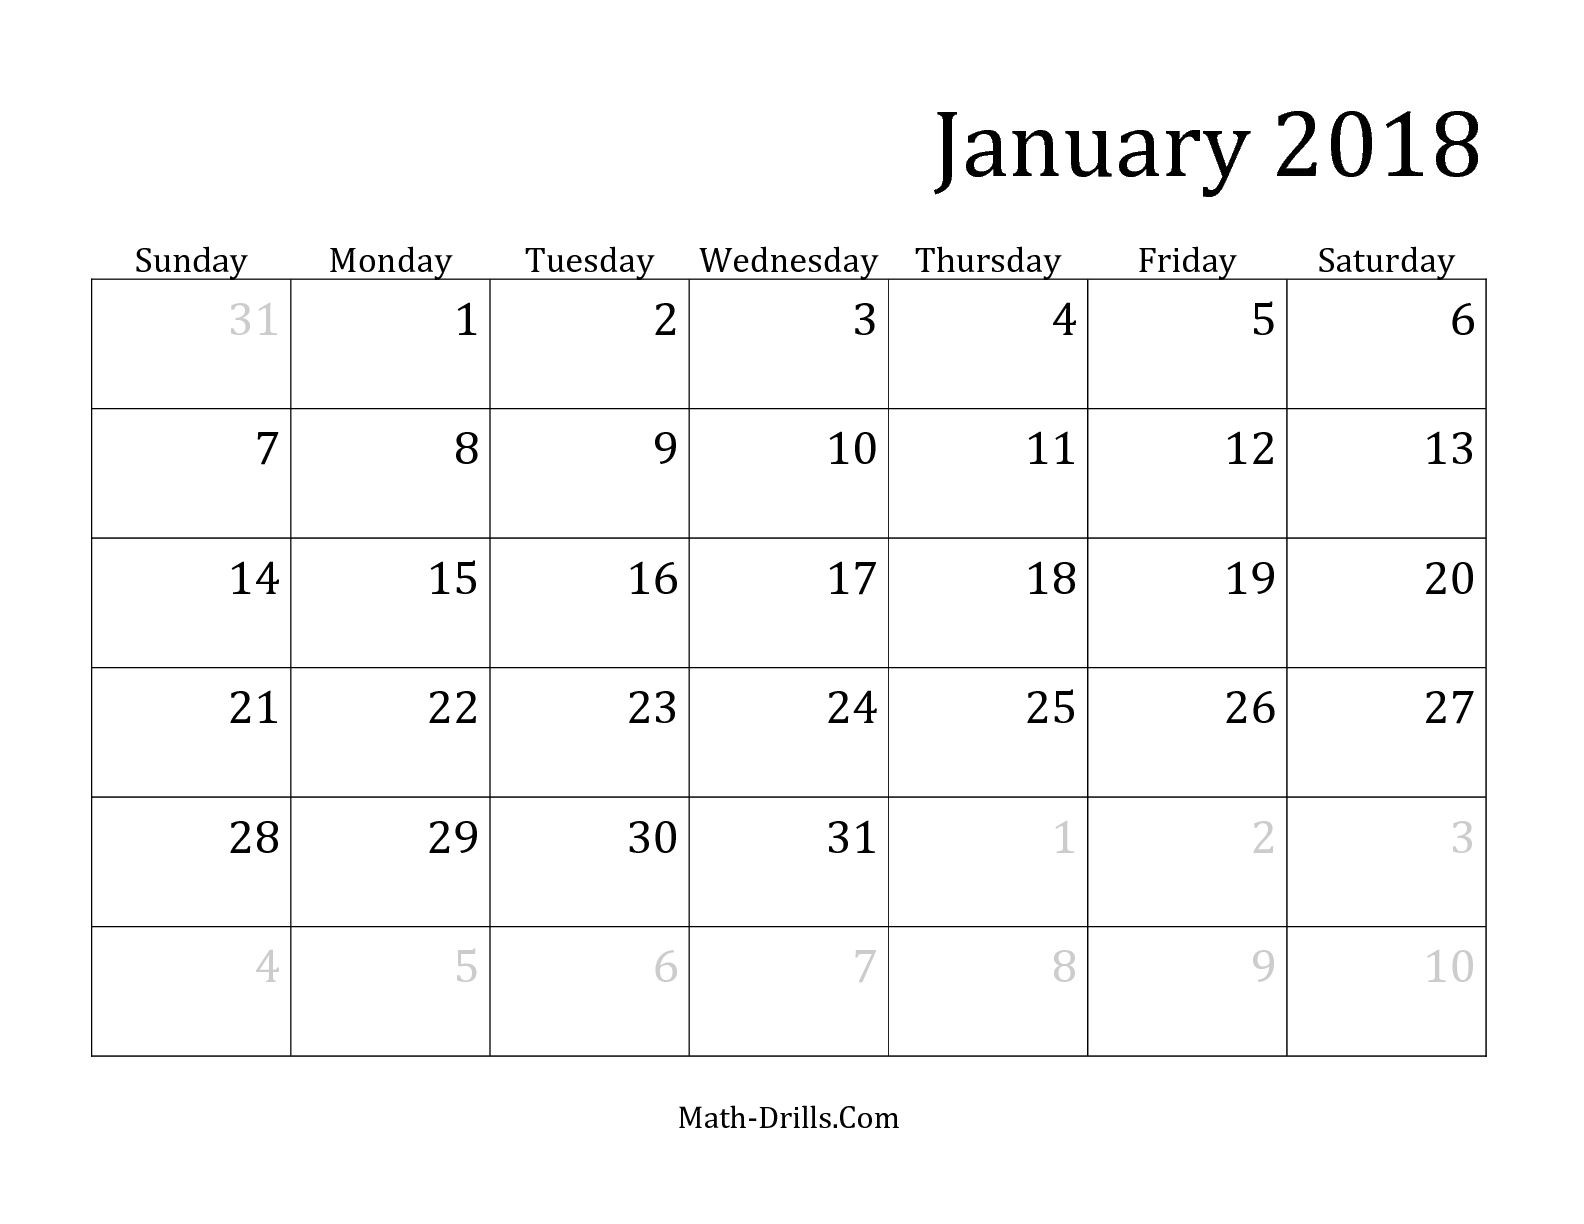 Printable Calendars Free Monthly Free Printable Calendar 2018 by Month